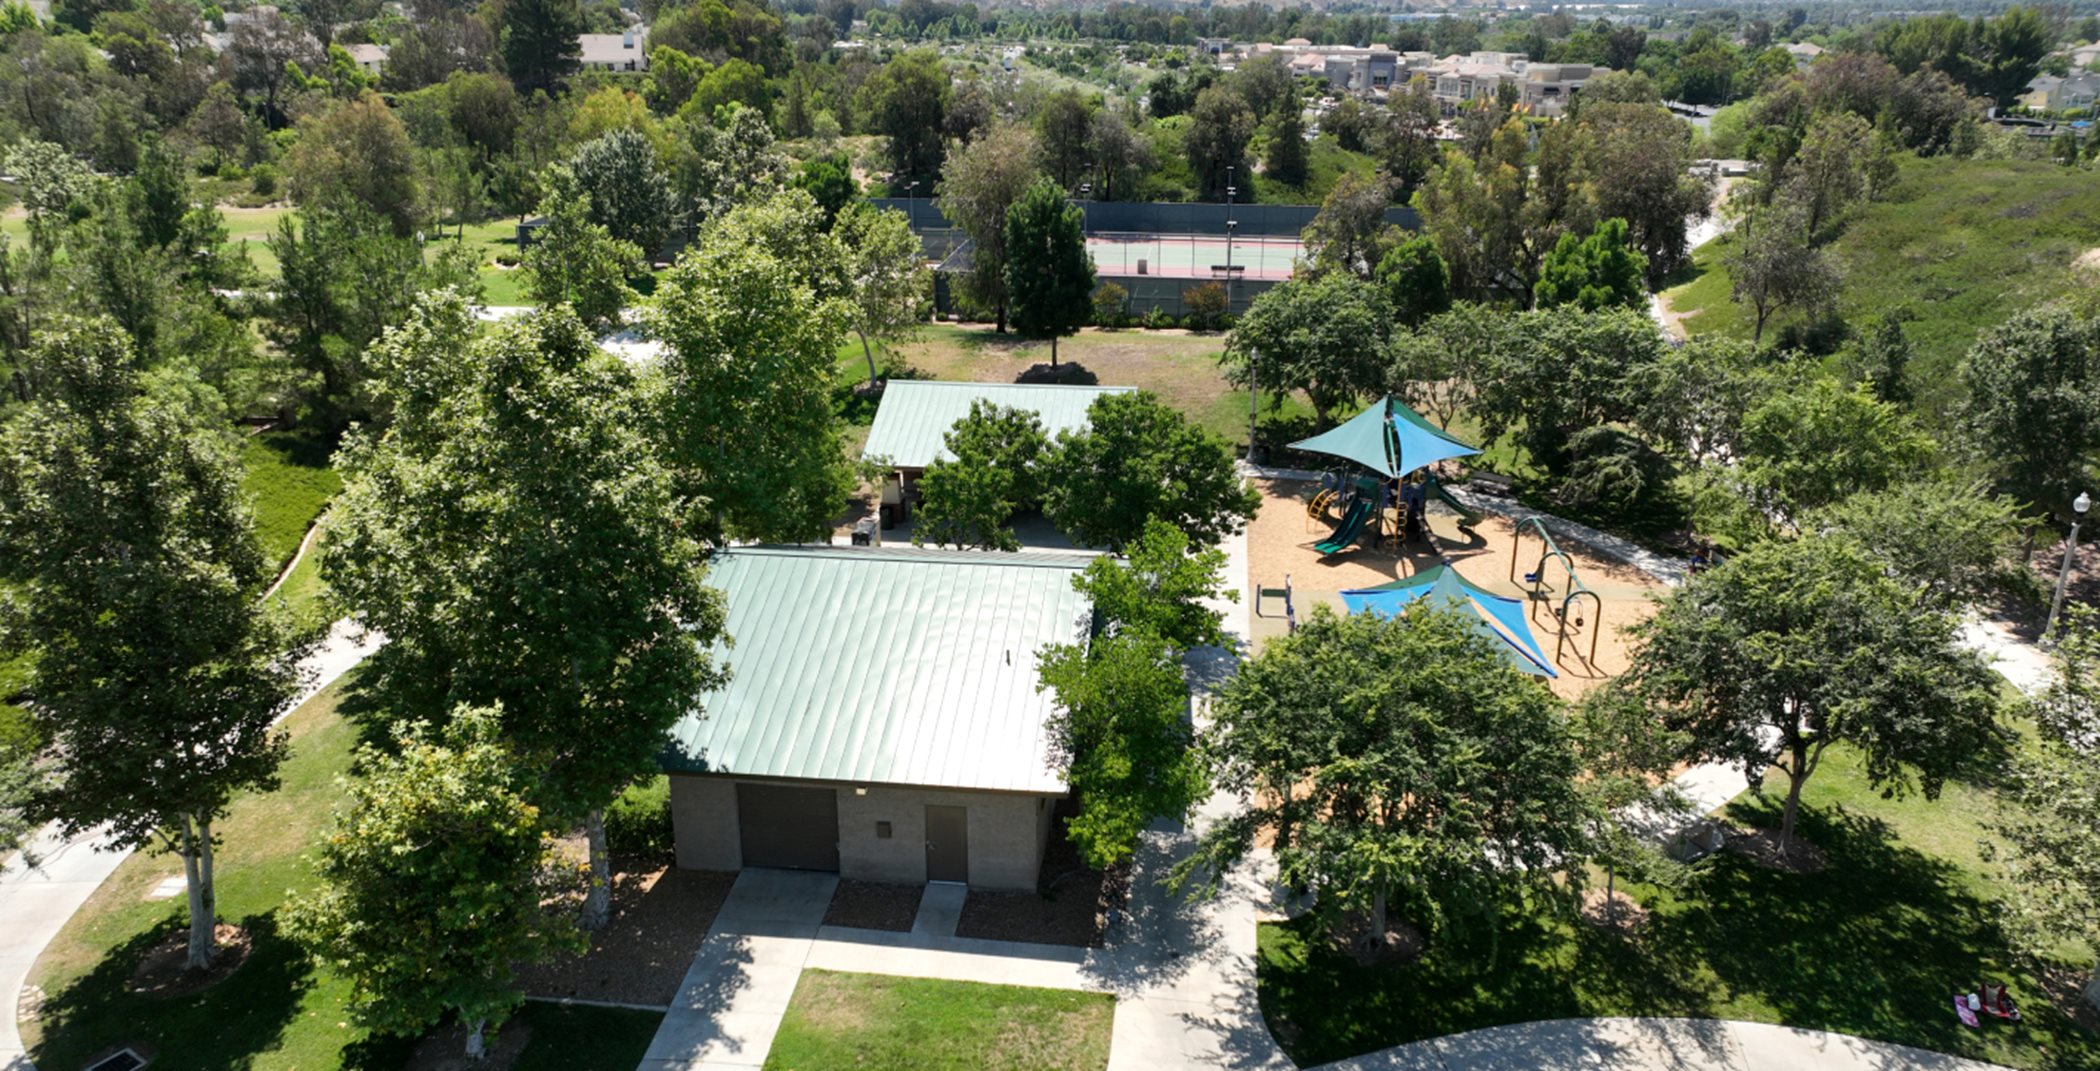 Aerial view of Valencia Heritage Park